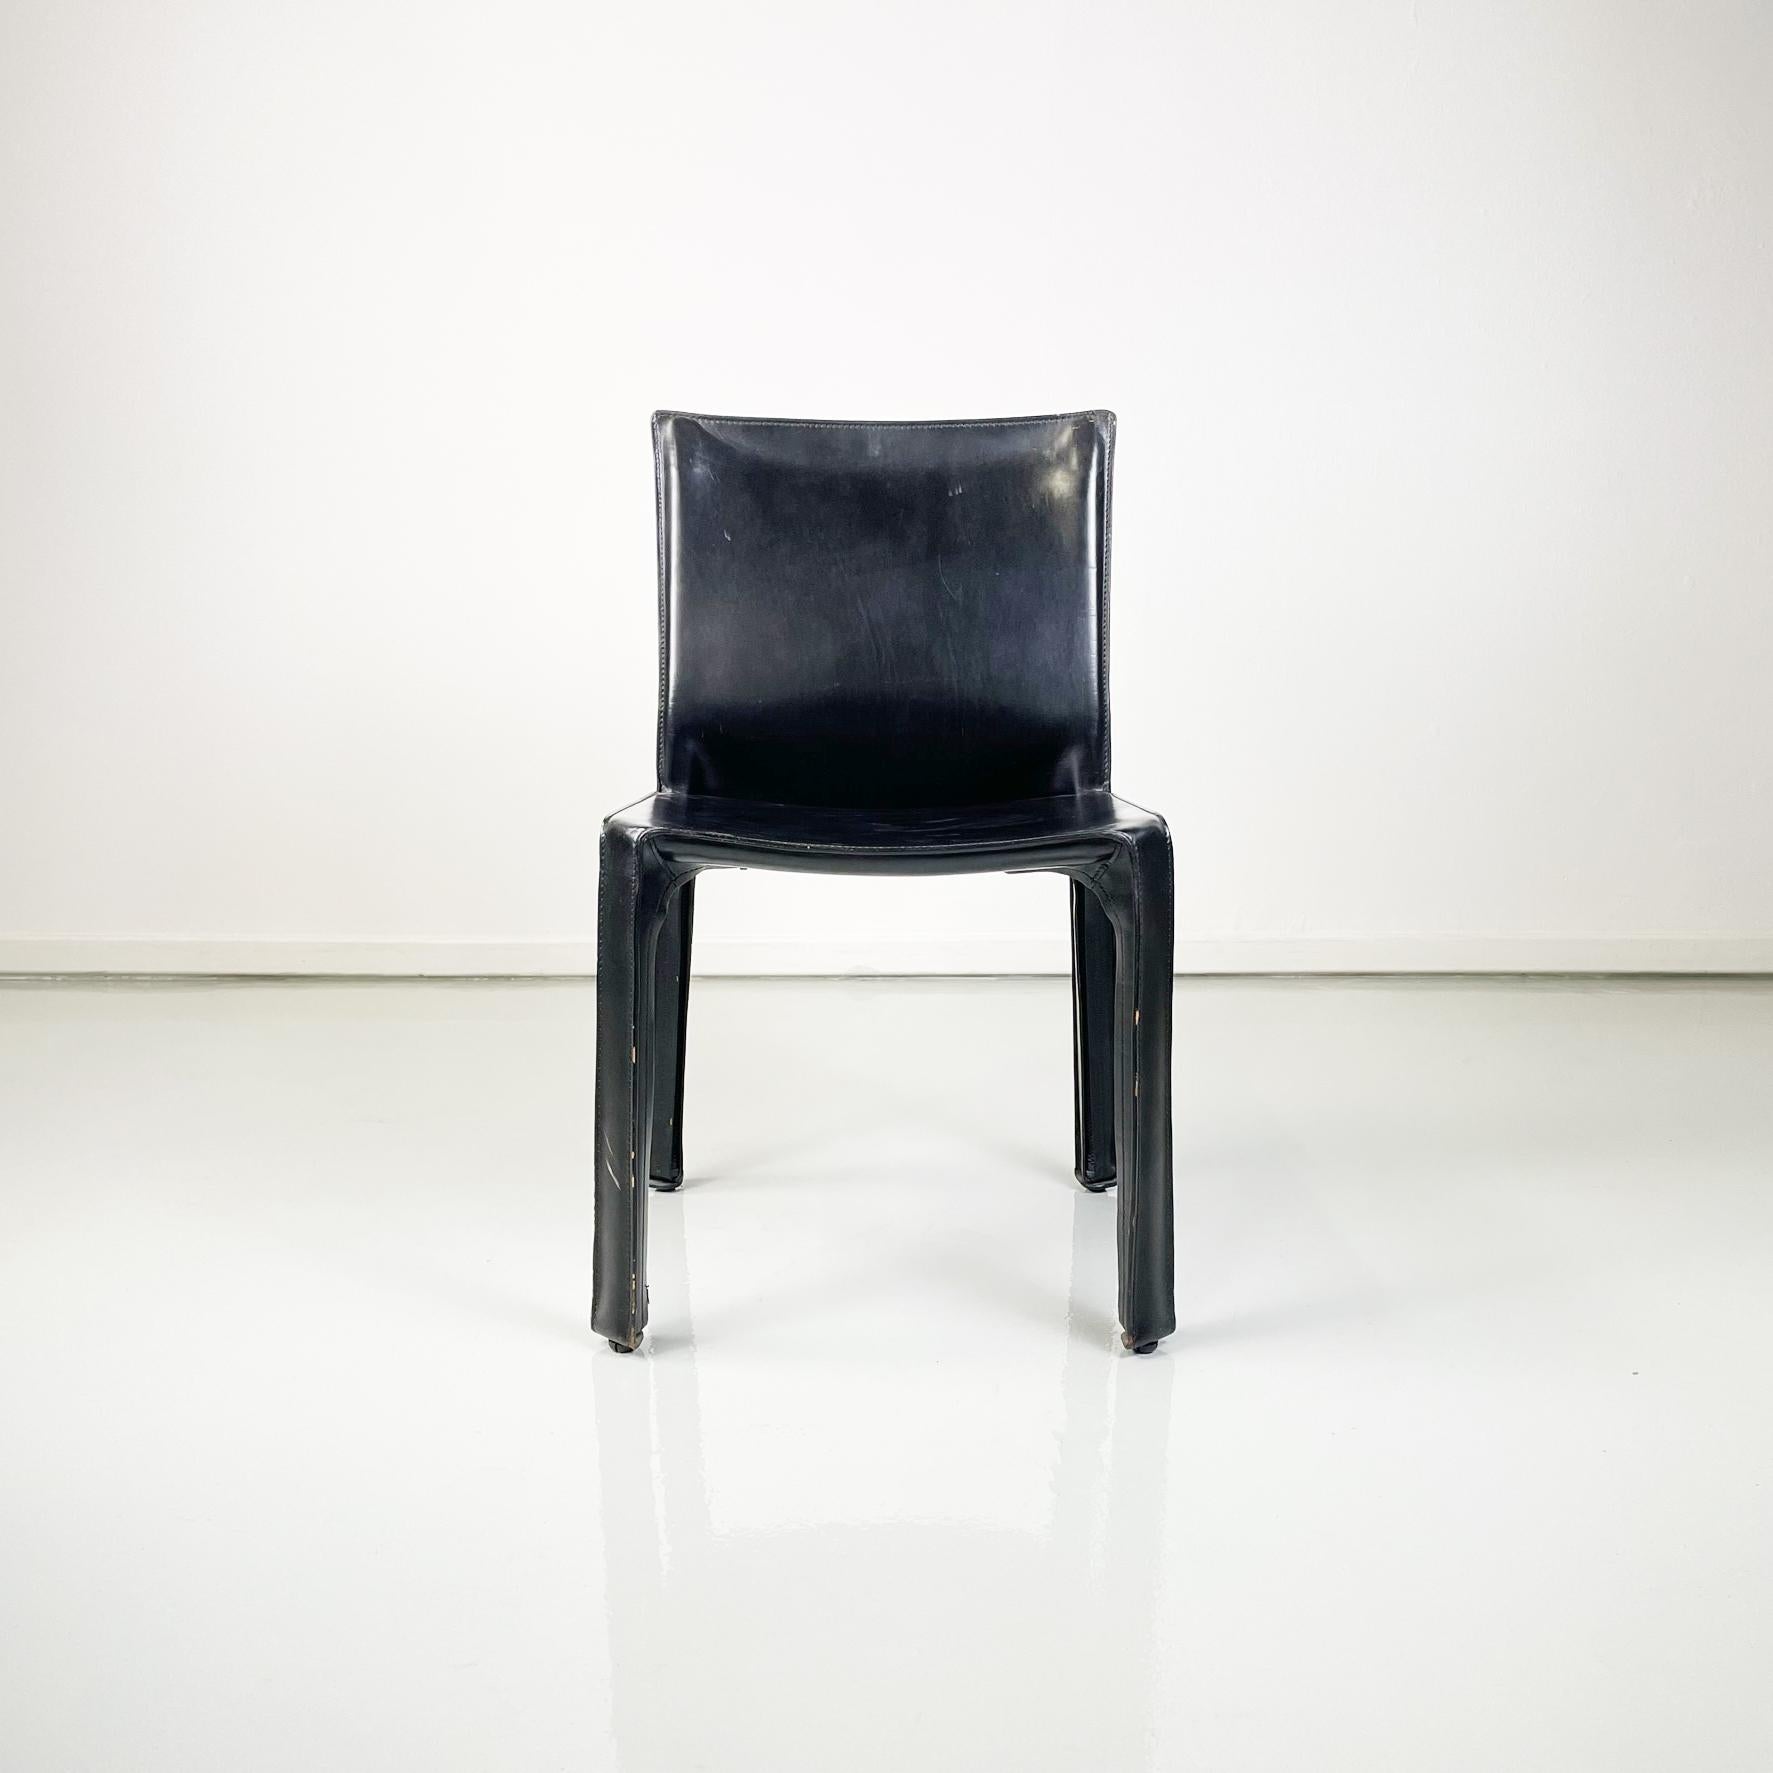 Modern Italian modern Leather chairs mod CAB 414 by Mario Bellini for Cassina, 1980s  For Sale